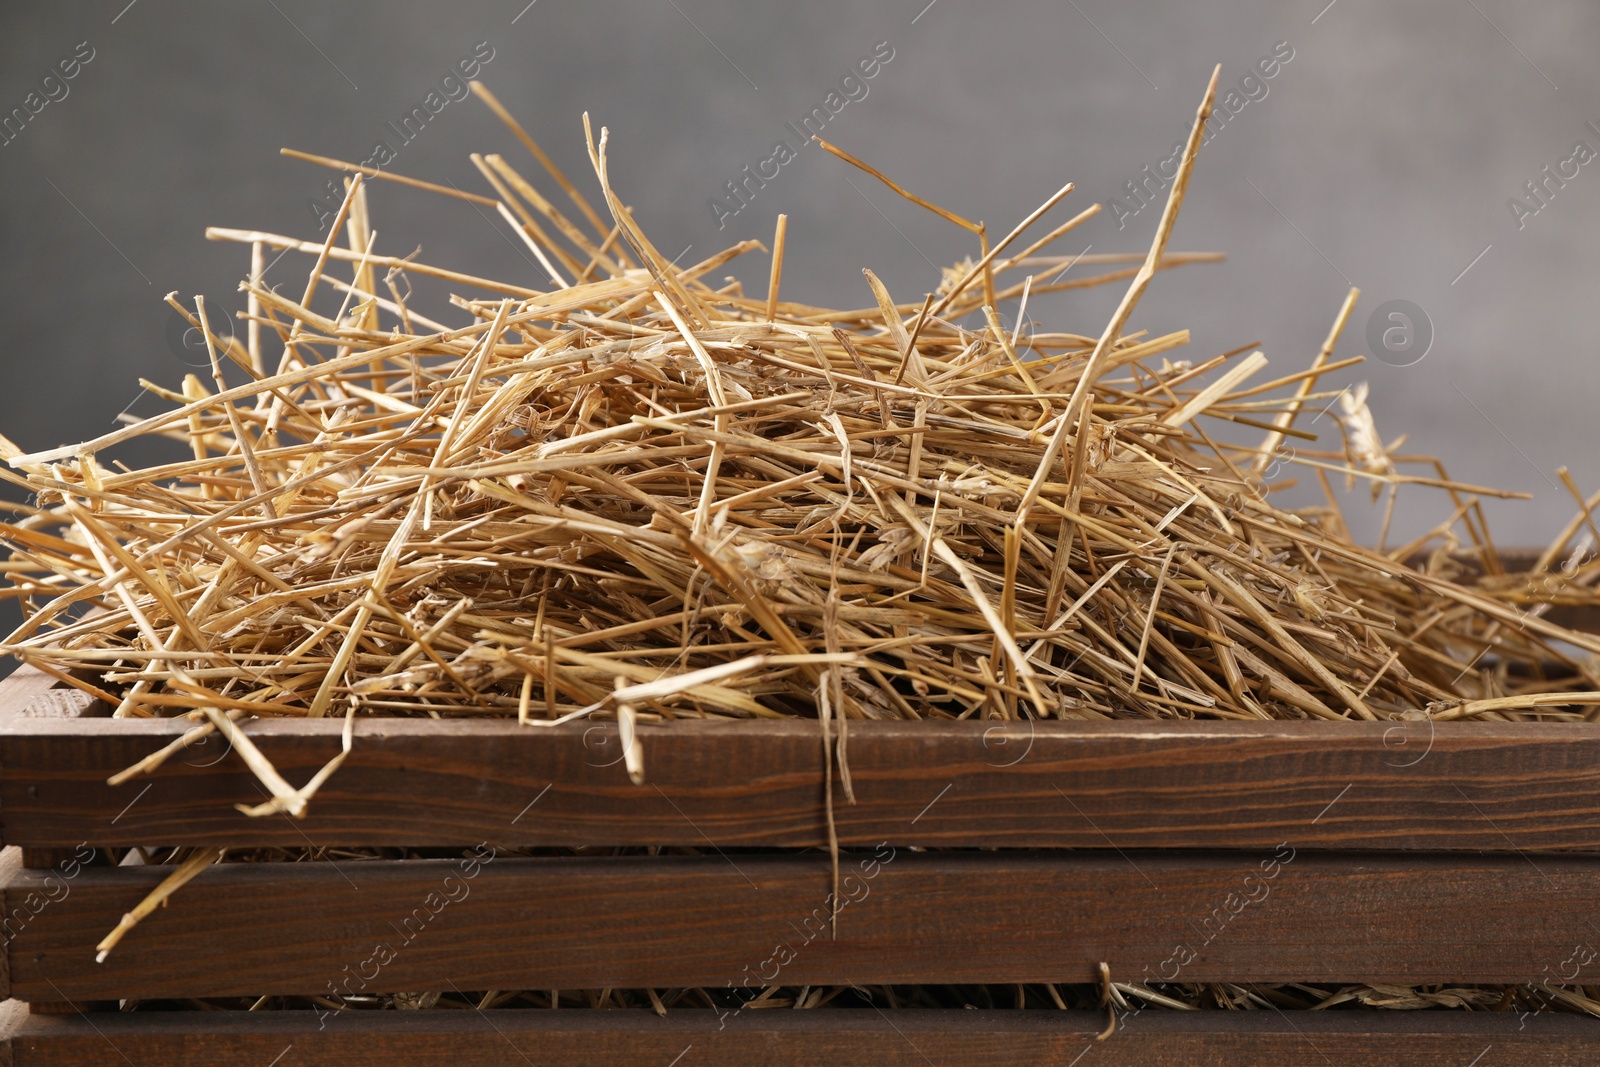 Photo of Dried straw in wooden crate against grey background, closeup